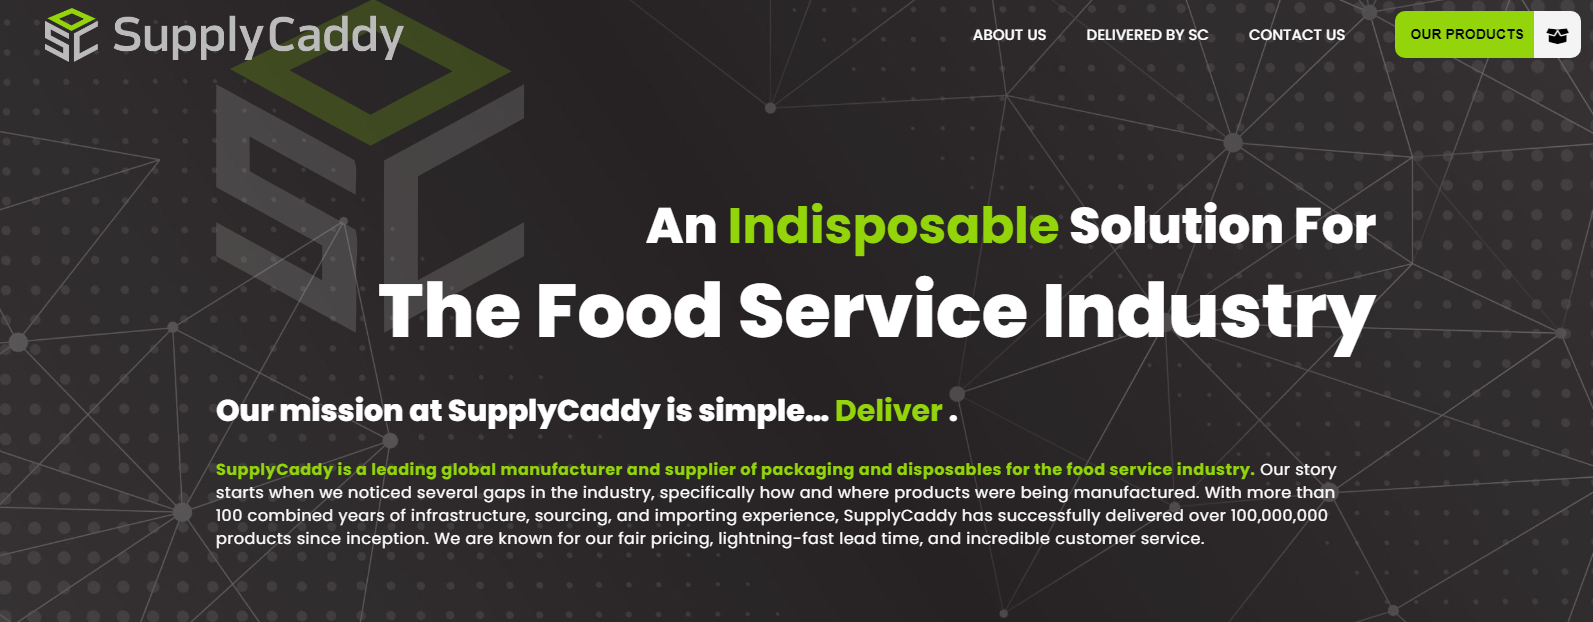 SupplyCaddy Raises $3.2M in Seed Funding From CEAS Investments.